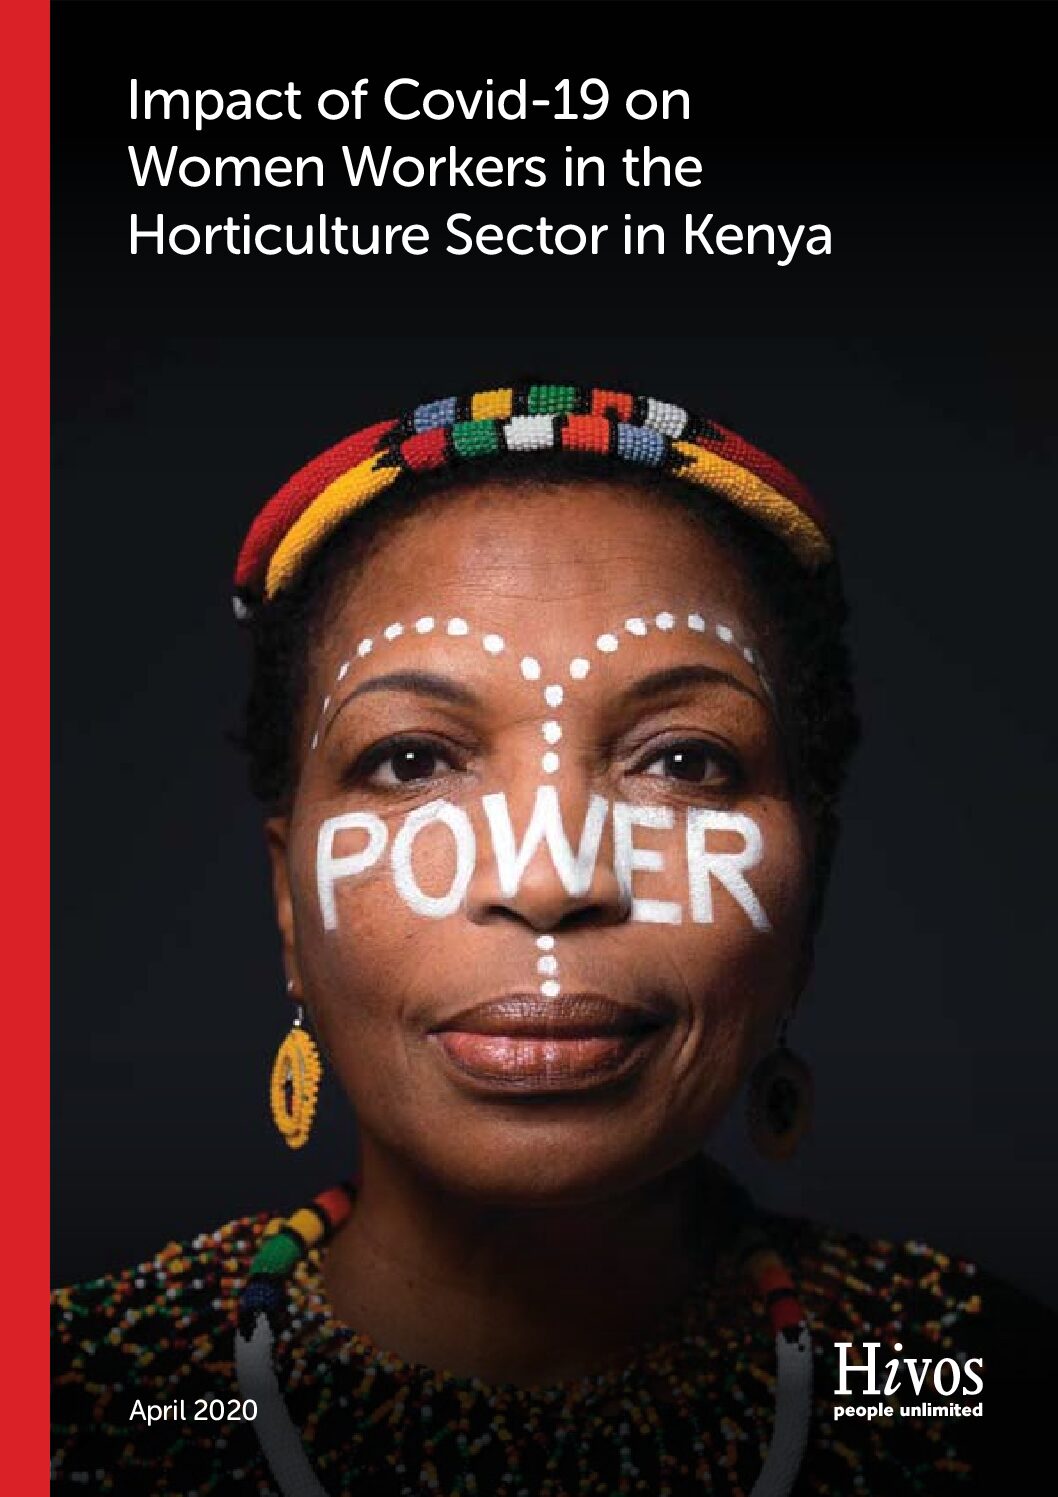 Impact of Covid-19 on Women Workers in the Horticulture Sector in Kenya